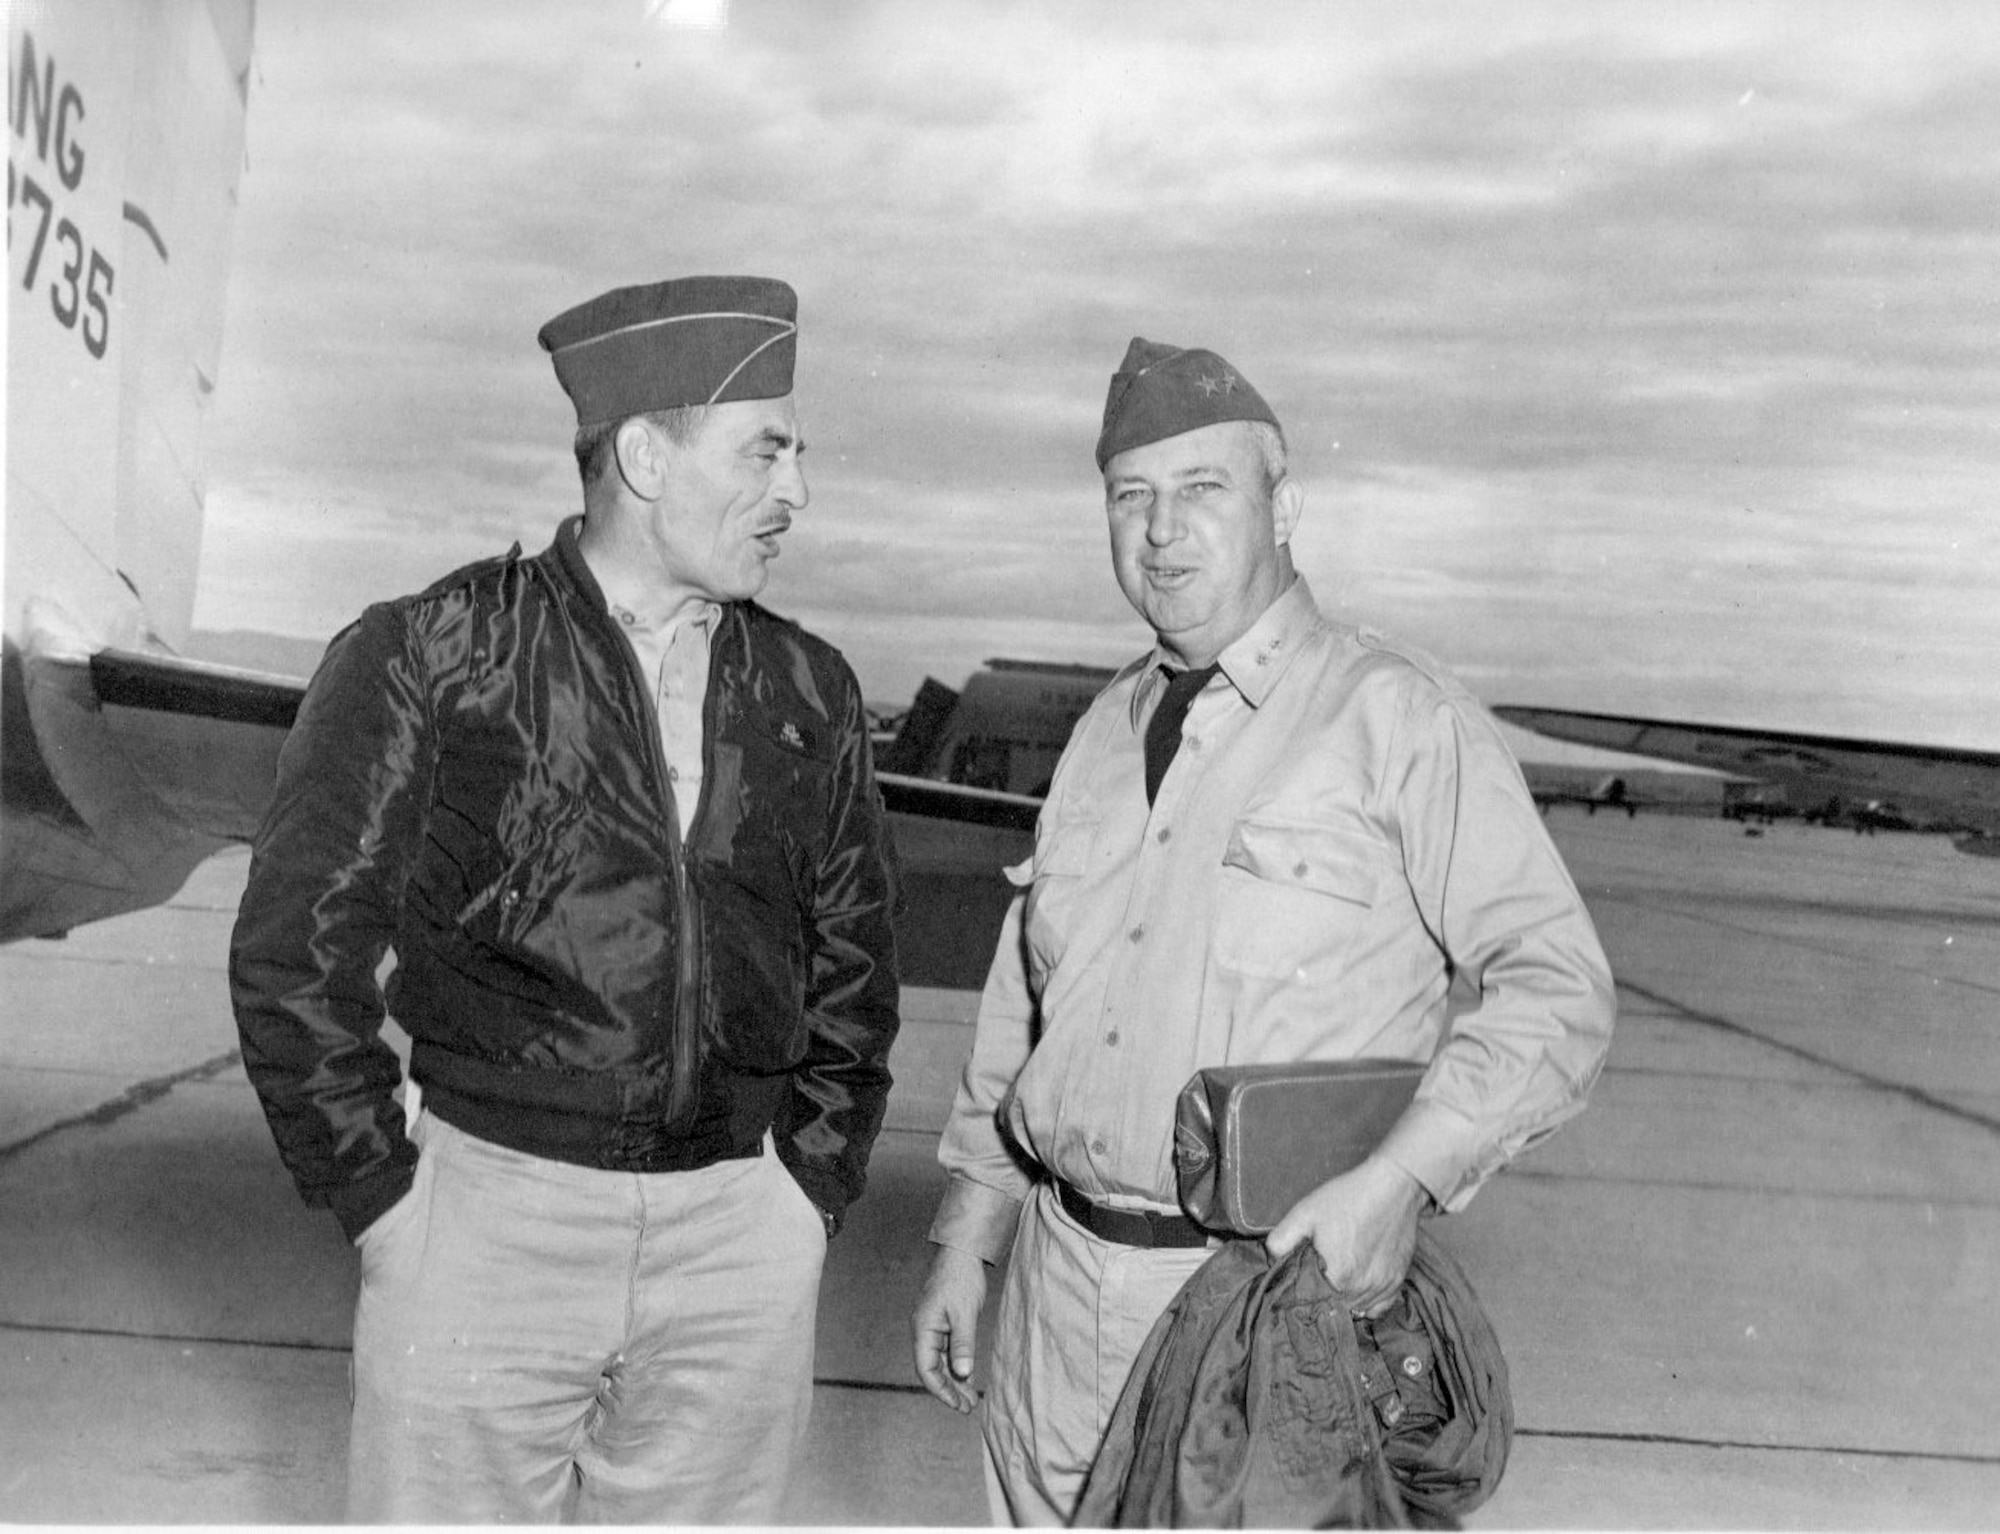 Brig. Gen. G. Robert Dodson, OreANG Commander, chats with an unidentified Major General, probably a visiting Adjutant General from a western state, on the ramp at Gowen Field,  June 15, 1954. (Courtesy 142FW History Archives)